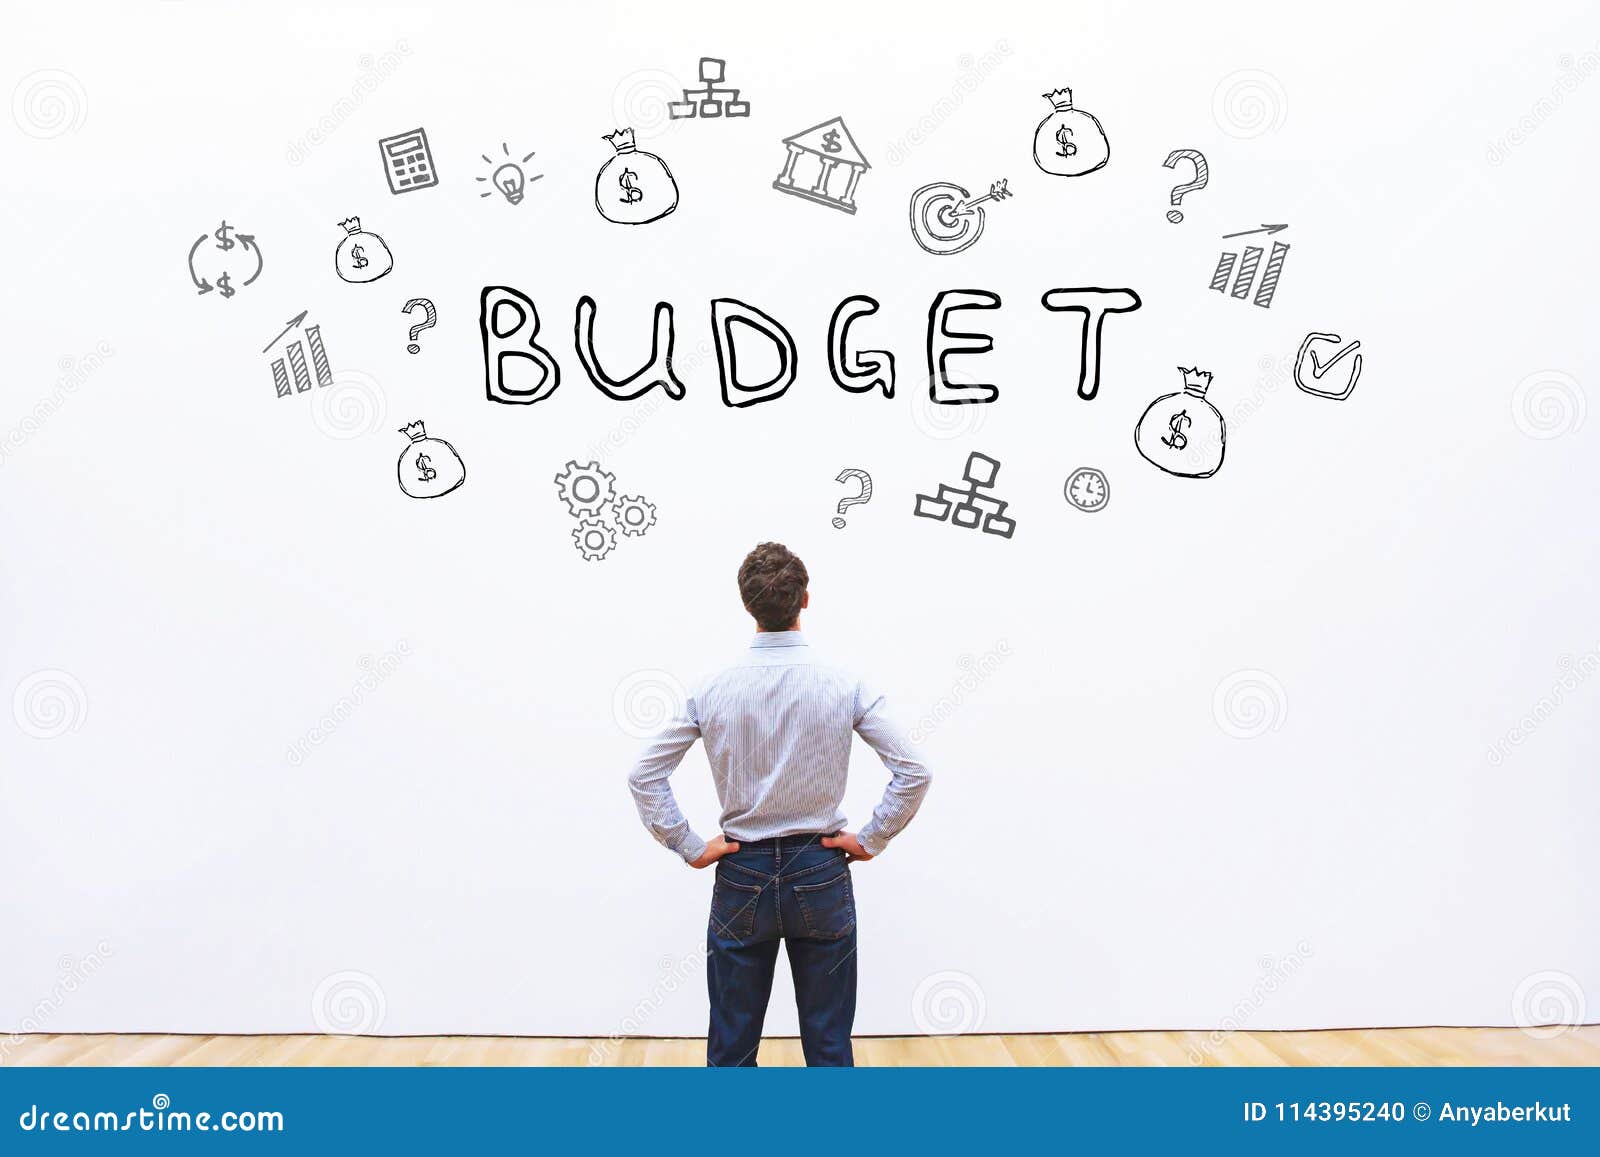 budget concept, financial planning